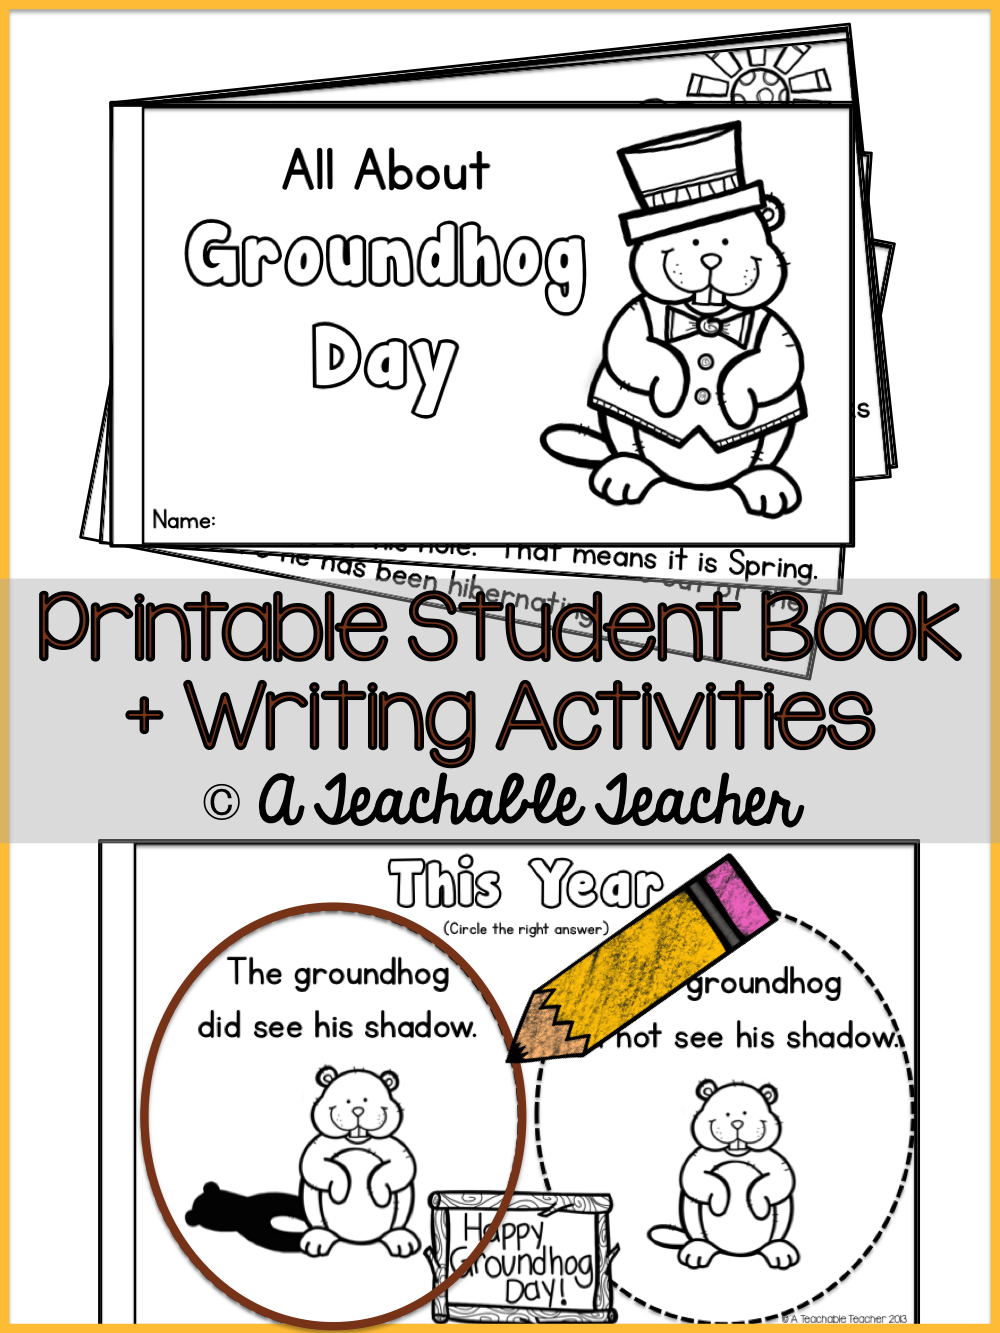 Printable Groundhog Day Book For Students. Teaches About The Ground - Free Printable Groundhog Day Booklet